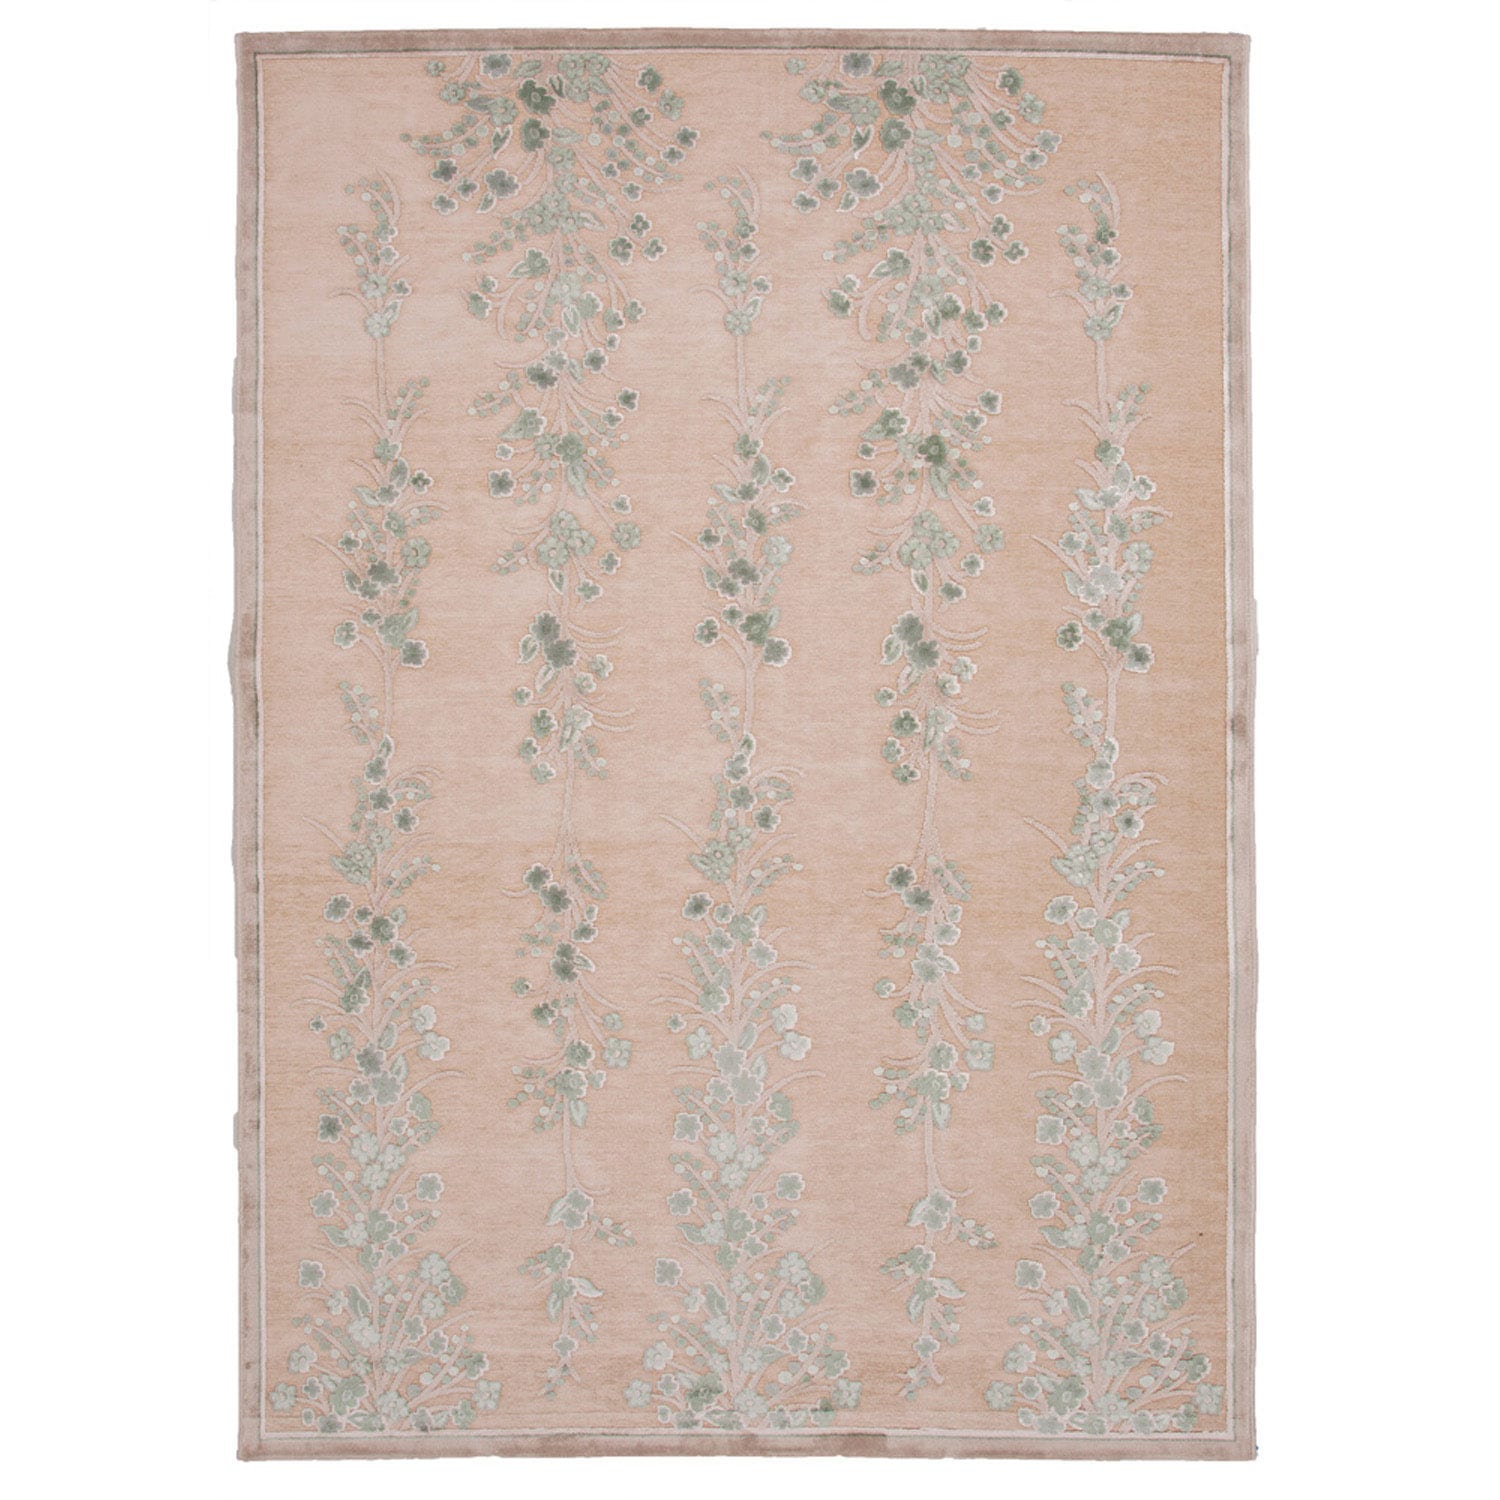 Transitional Floral Pattern Ivory Rug (2 X 3)